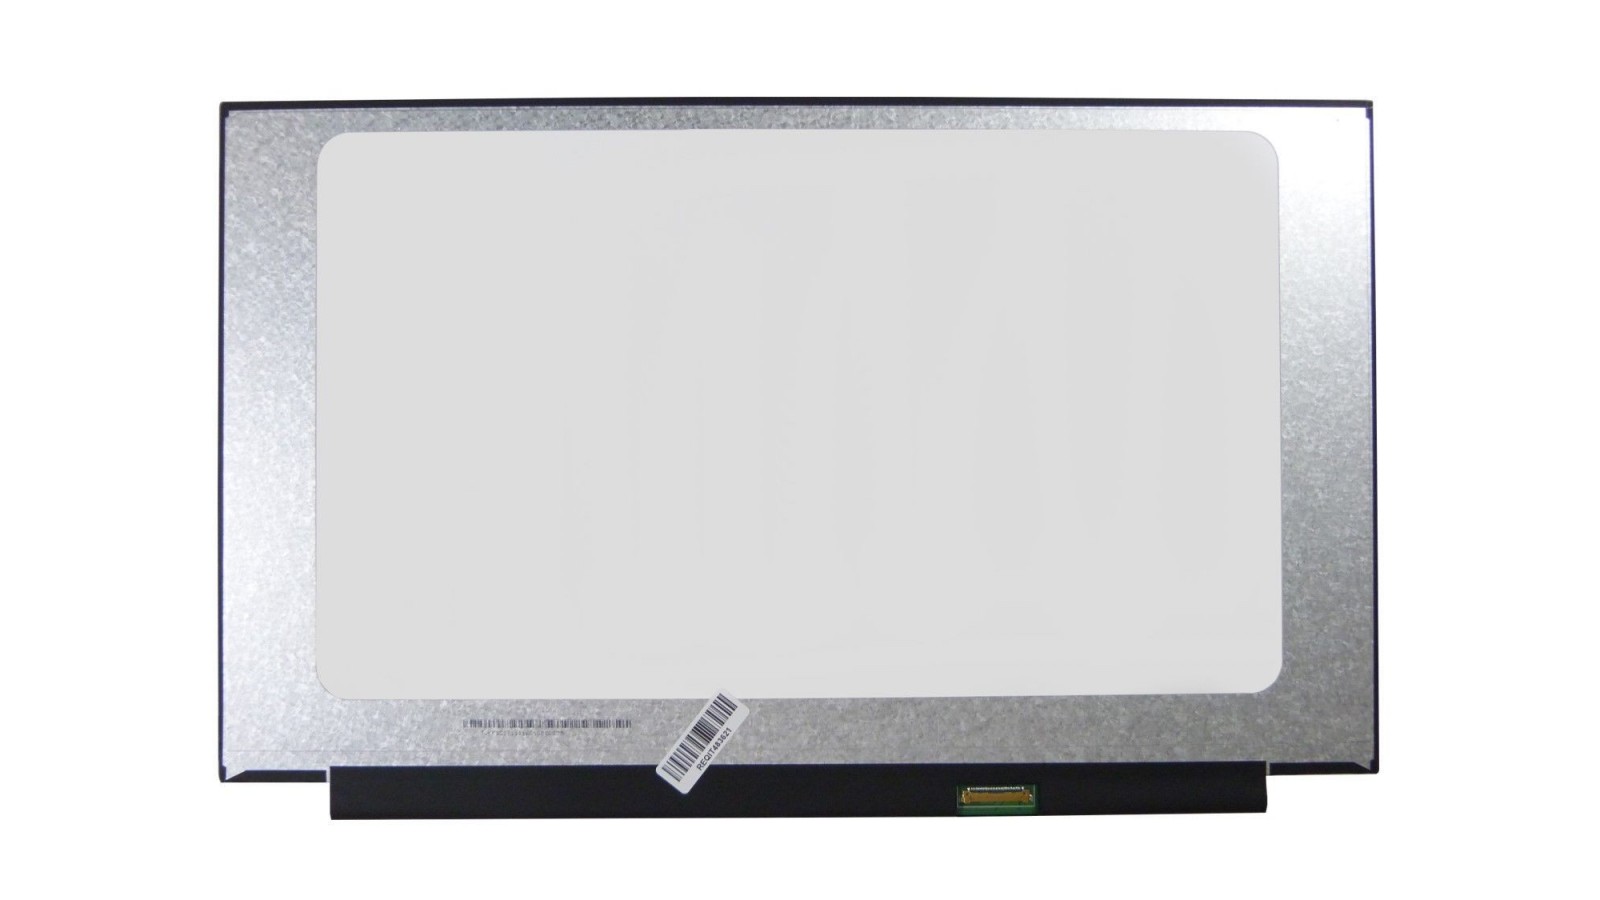 Display LCD Schermo 15,6 Led compatibile HP Ultrabook Pavilion 15-cs2093nl Full Hd connettore 30 pin